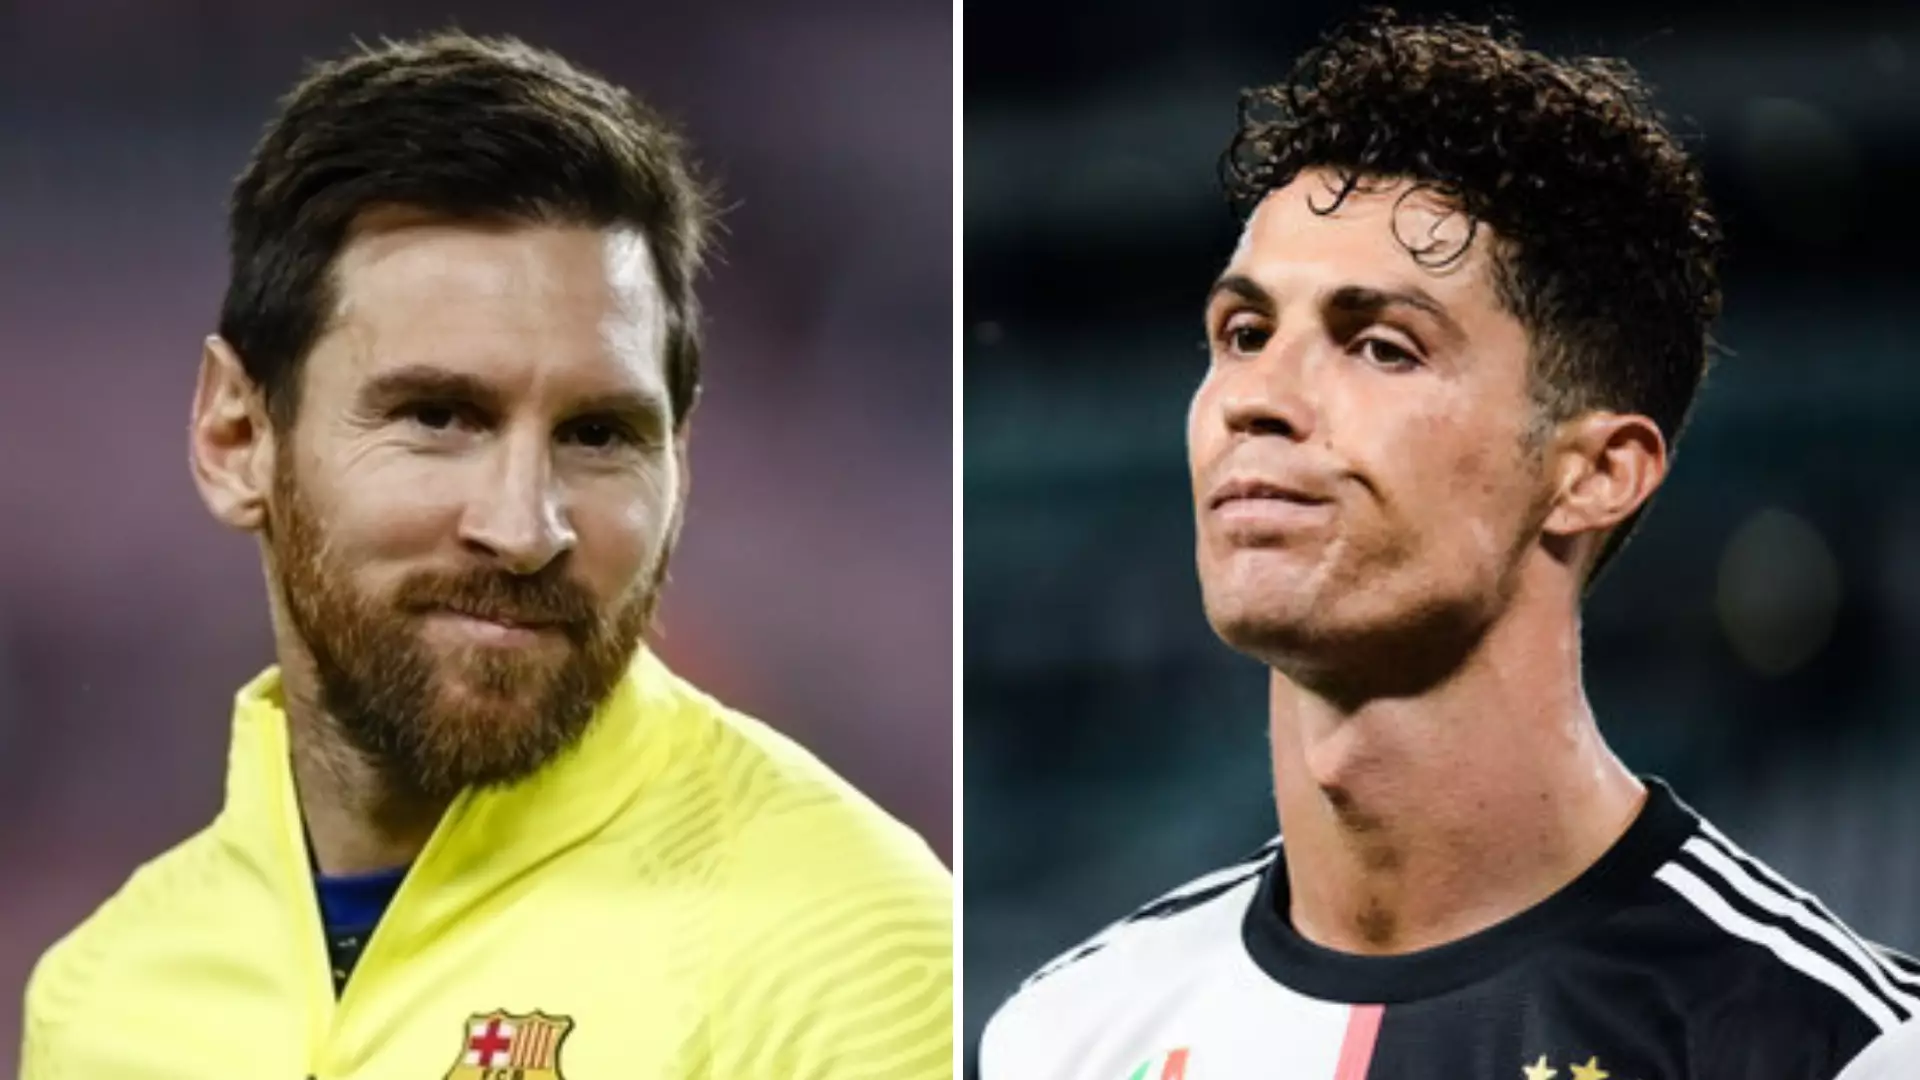 Lionel Messi Asked If He Would Pass To Cristiano Ronaldo If They Played Together